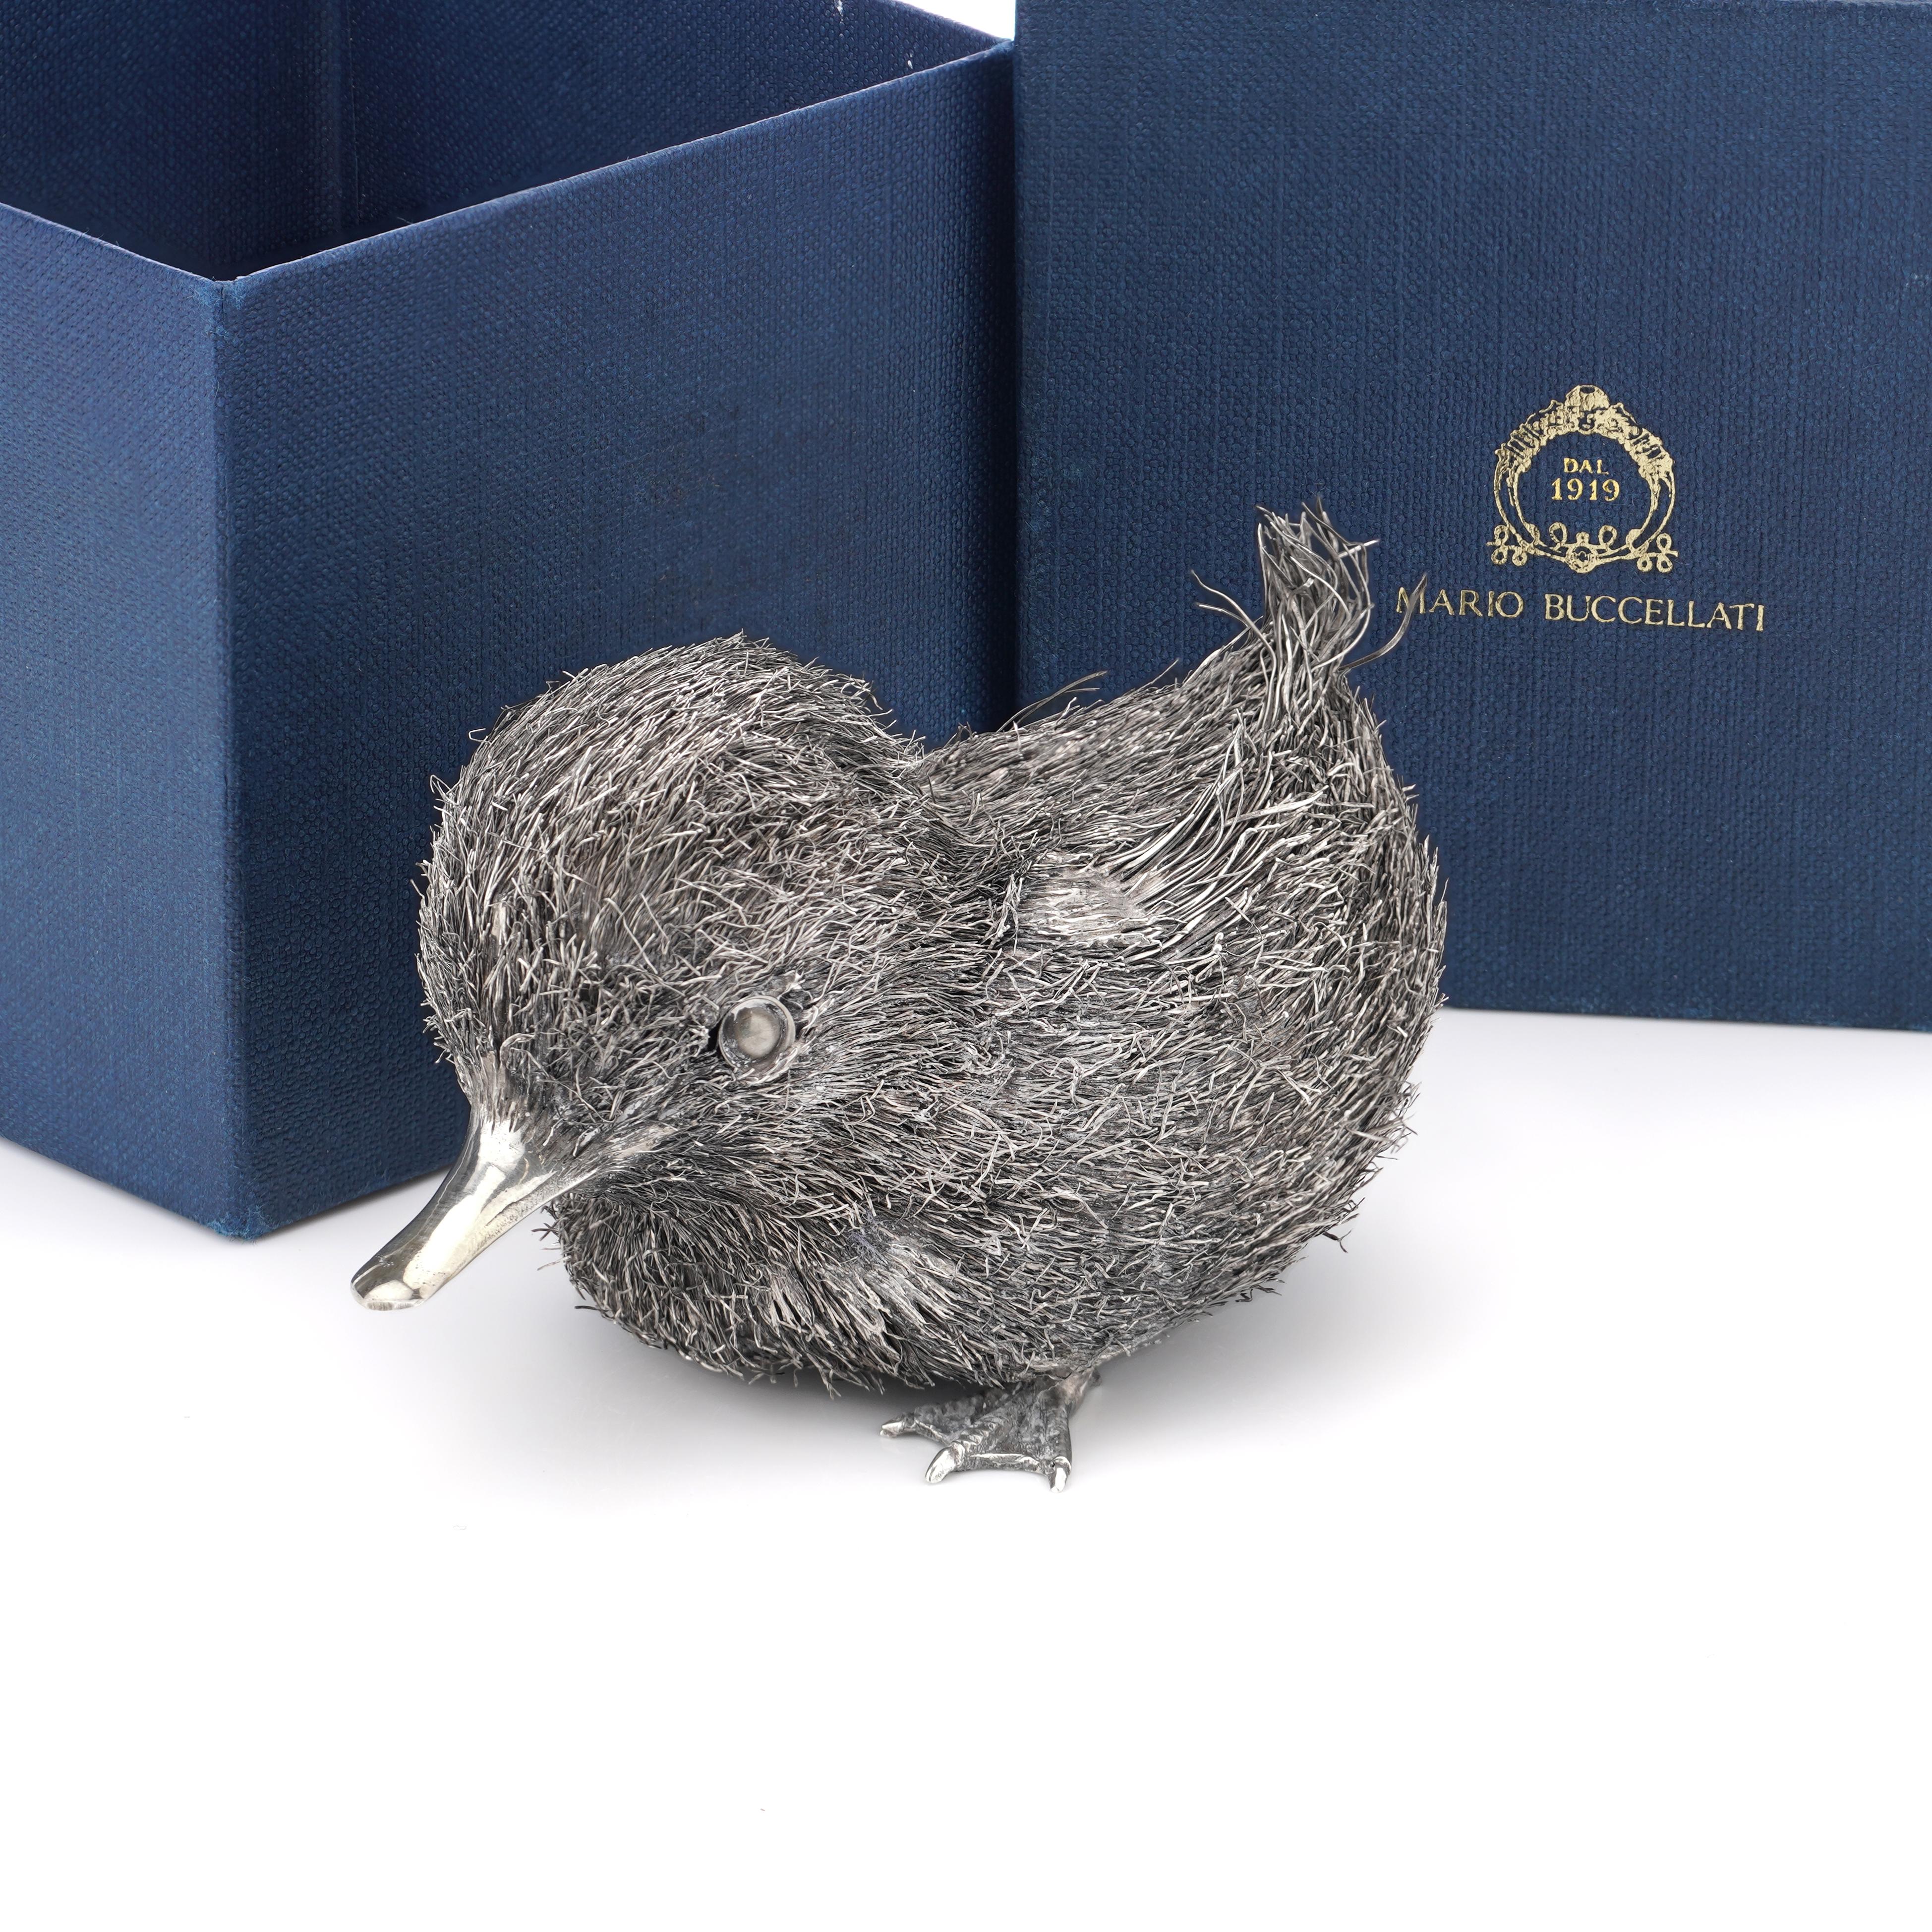 Mario Buccellati vintage 800. Italian silver duckling figurine. 
Made Italy, Milano, Ca.1930's 
Fully Hallmarked.

The furry duckling figurine is realistically modelled with wire feather. 
The body is signed “M. Buccellati Italy 800” on the